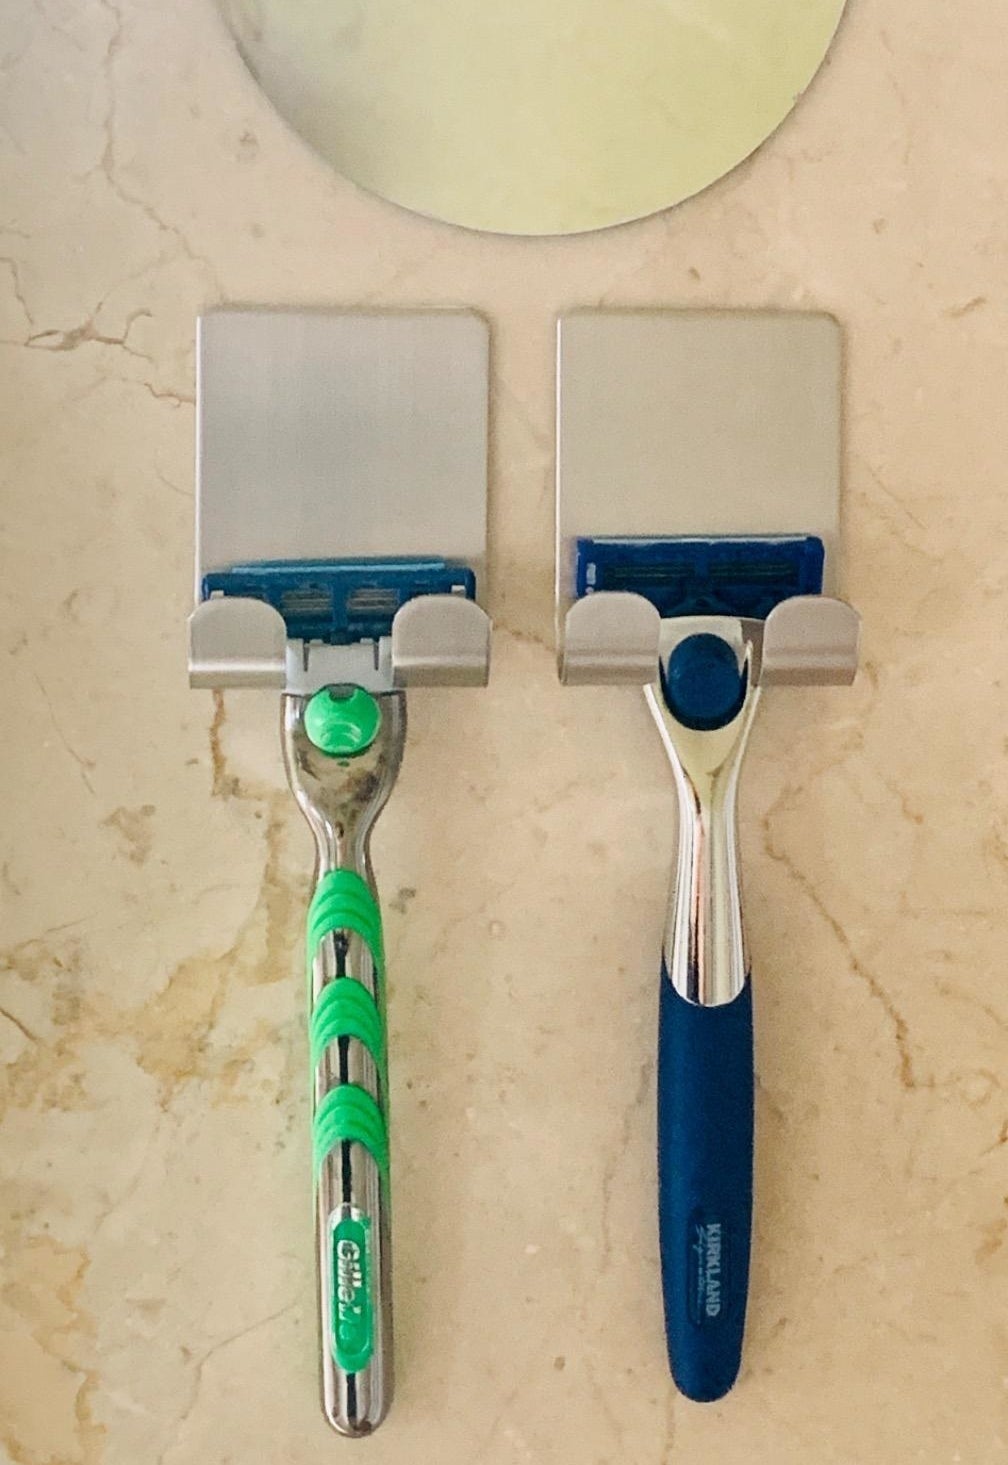 Two razors hanging next to each other on self-adhesive razor holders 